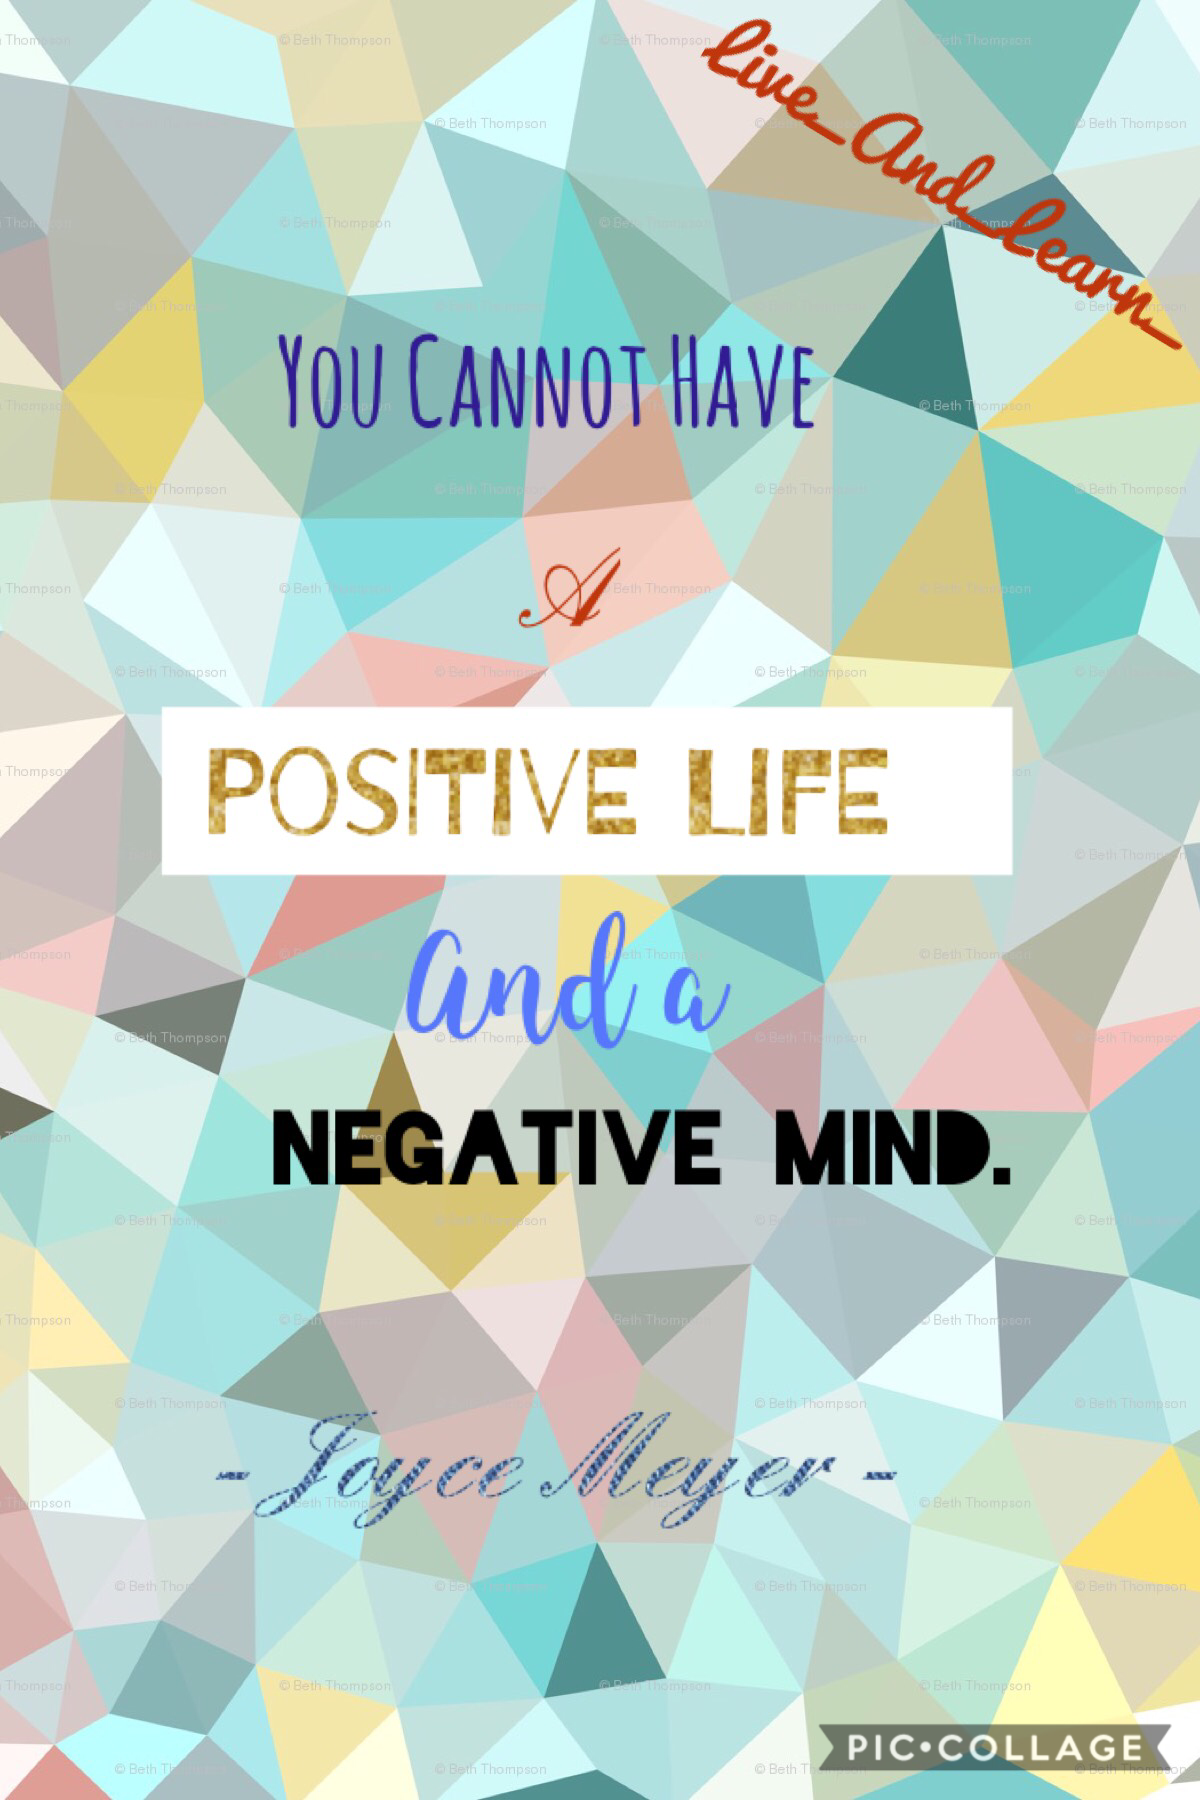 “ You Cannot have a positive life and a negative mind “ Enjoy!!